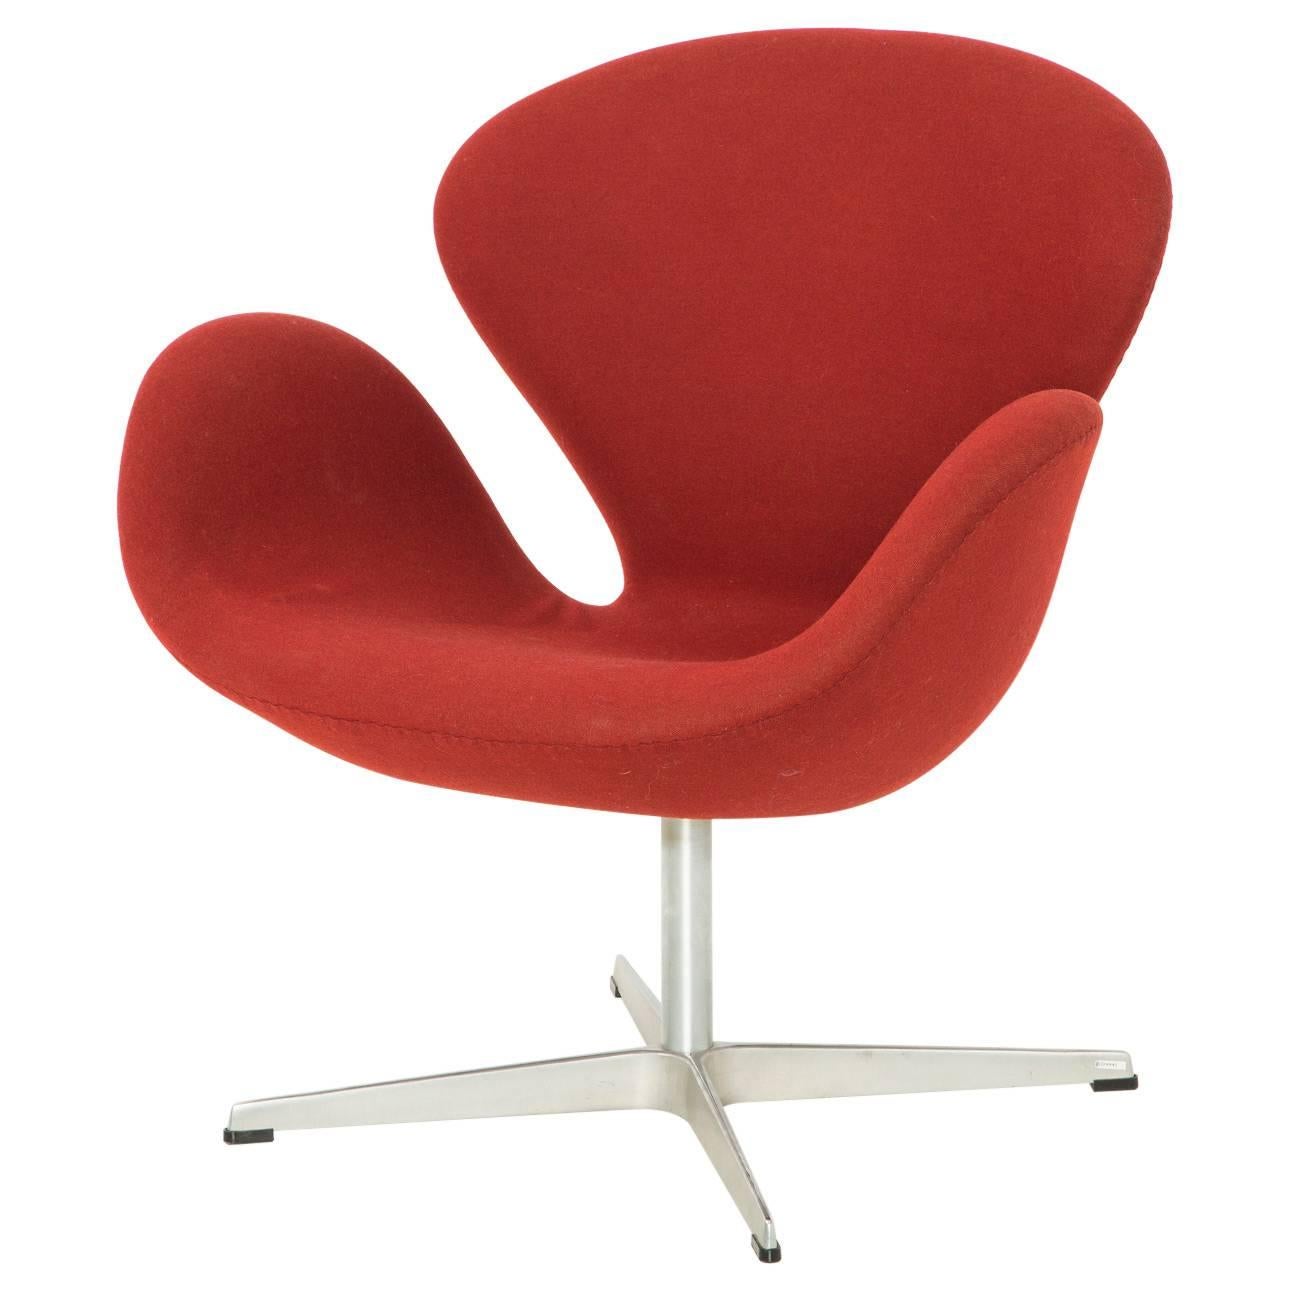 Iconic swan chair by Arne Jacobsen for Fritz Hansen, designed in 1958. Seat upholstered in red fabric on an aluminum base. 

Foam, frame and fabric are in good condition. Fritz Hansen labels underneath seat.  

